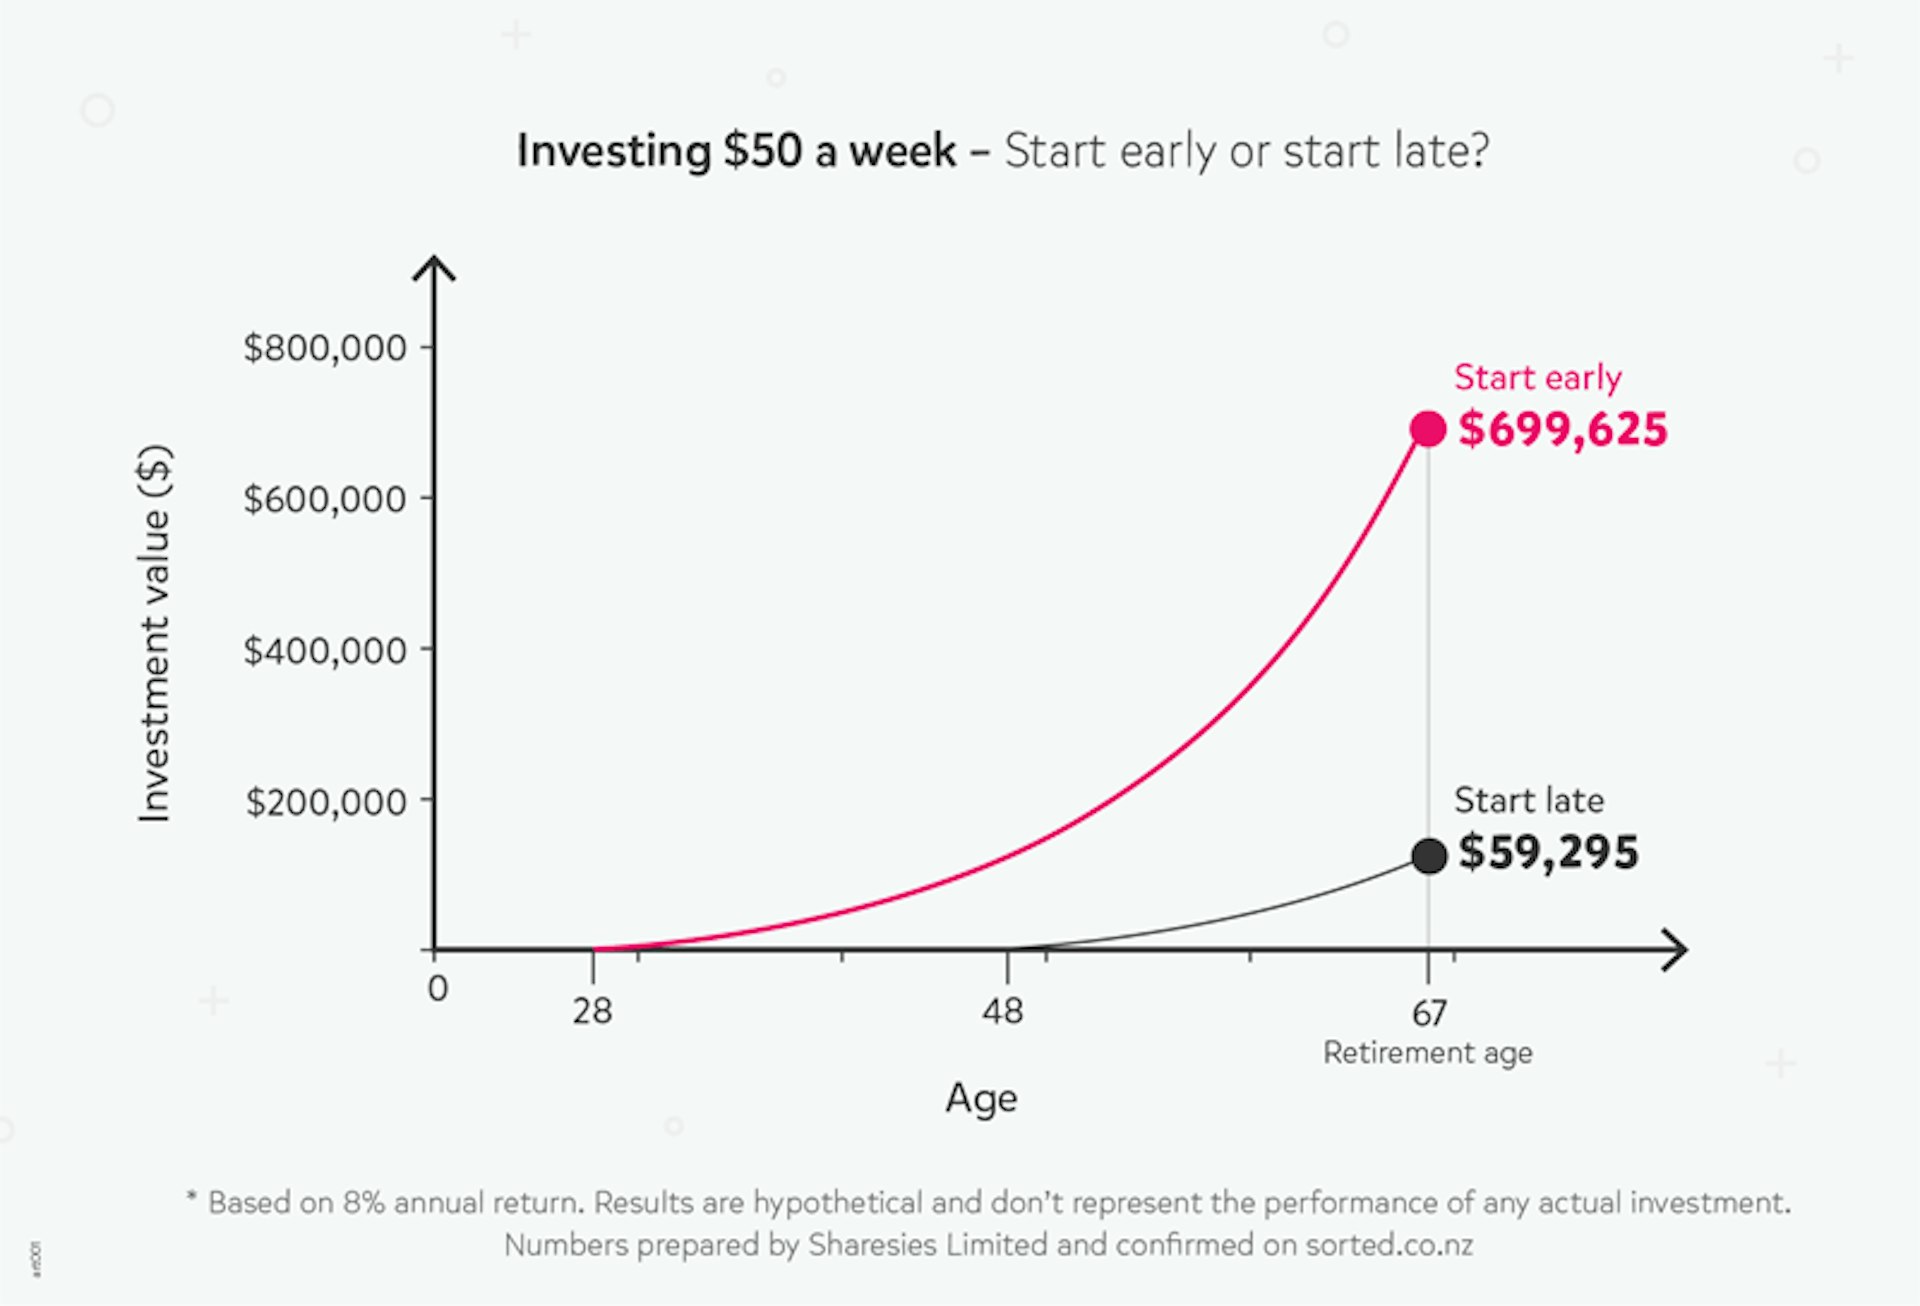 Hypothetical chart that shows the difference between investing $50 a week starting at 28 vs starting at 50. The 'start early' value is $699,625 at retirement age whereas the 'start late' line is $59,295.